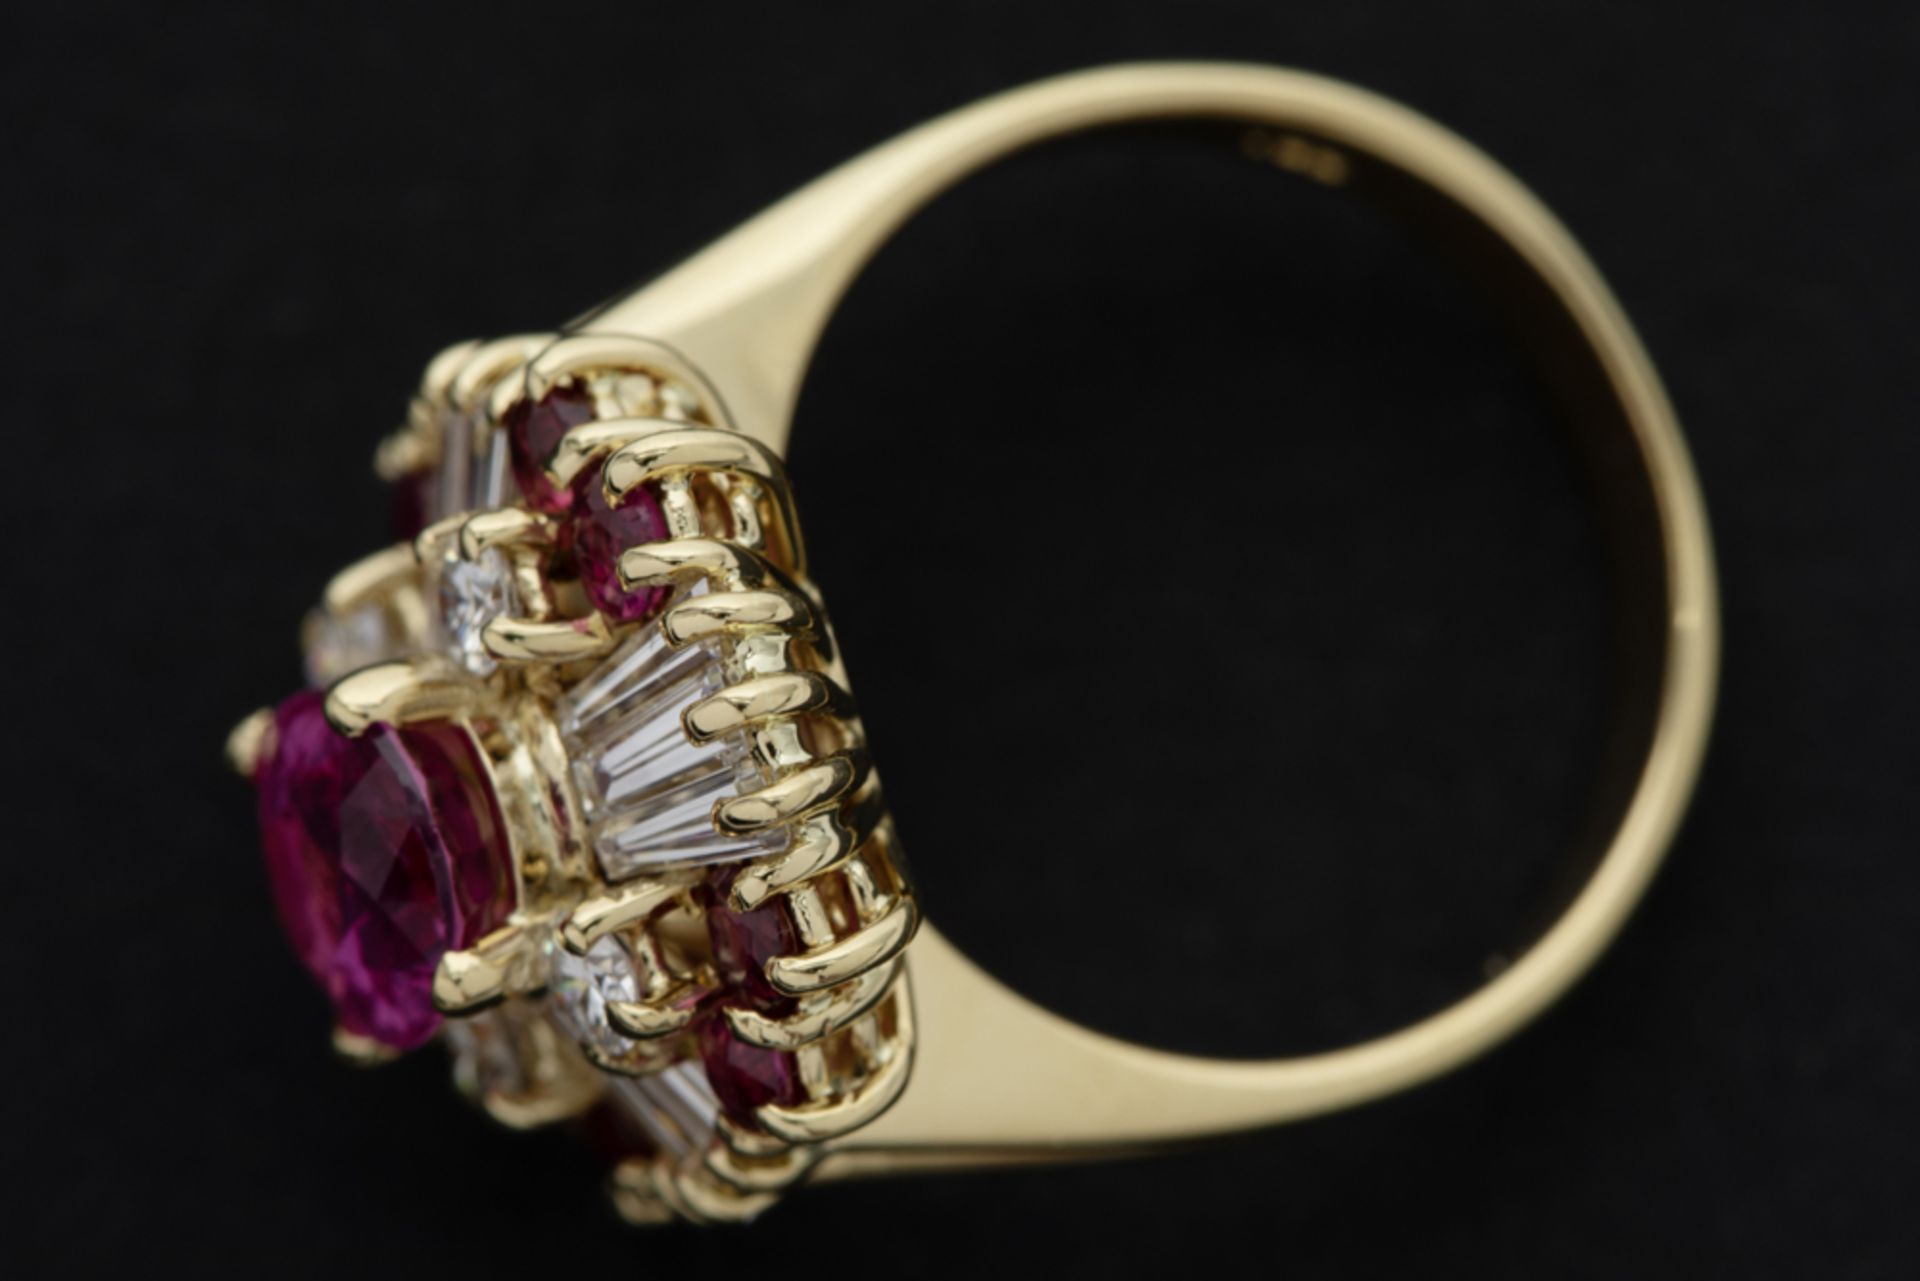 eighties' ring in yellow gold (18 carat) with a 1,61 carat oval non-heated pink sapphire - Bild 2 aus 3